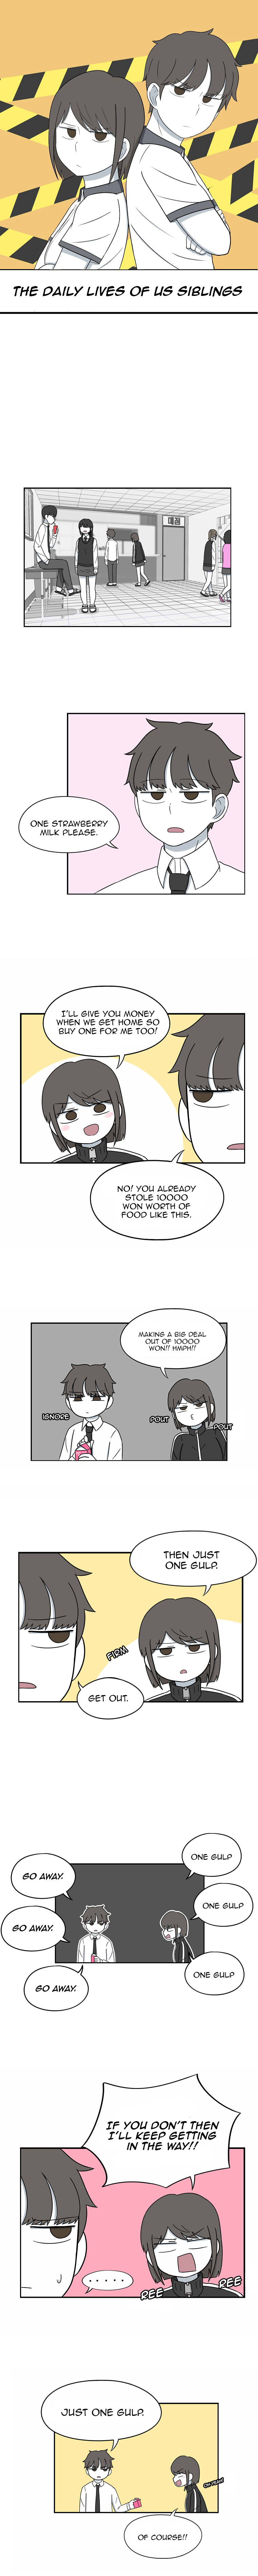 The Daily Lives of Us Siblings Vol. 1 Ch. 43 Friends before the friend became a friend.